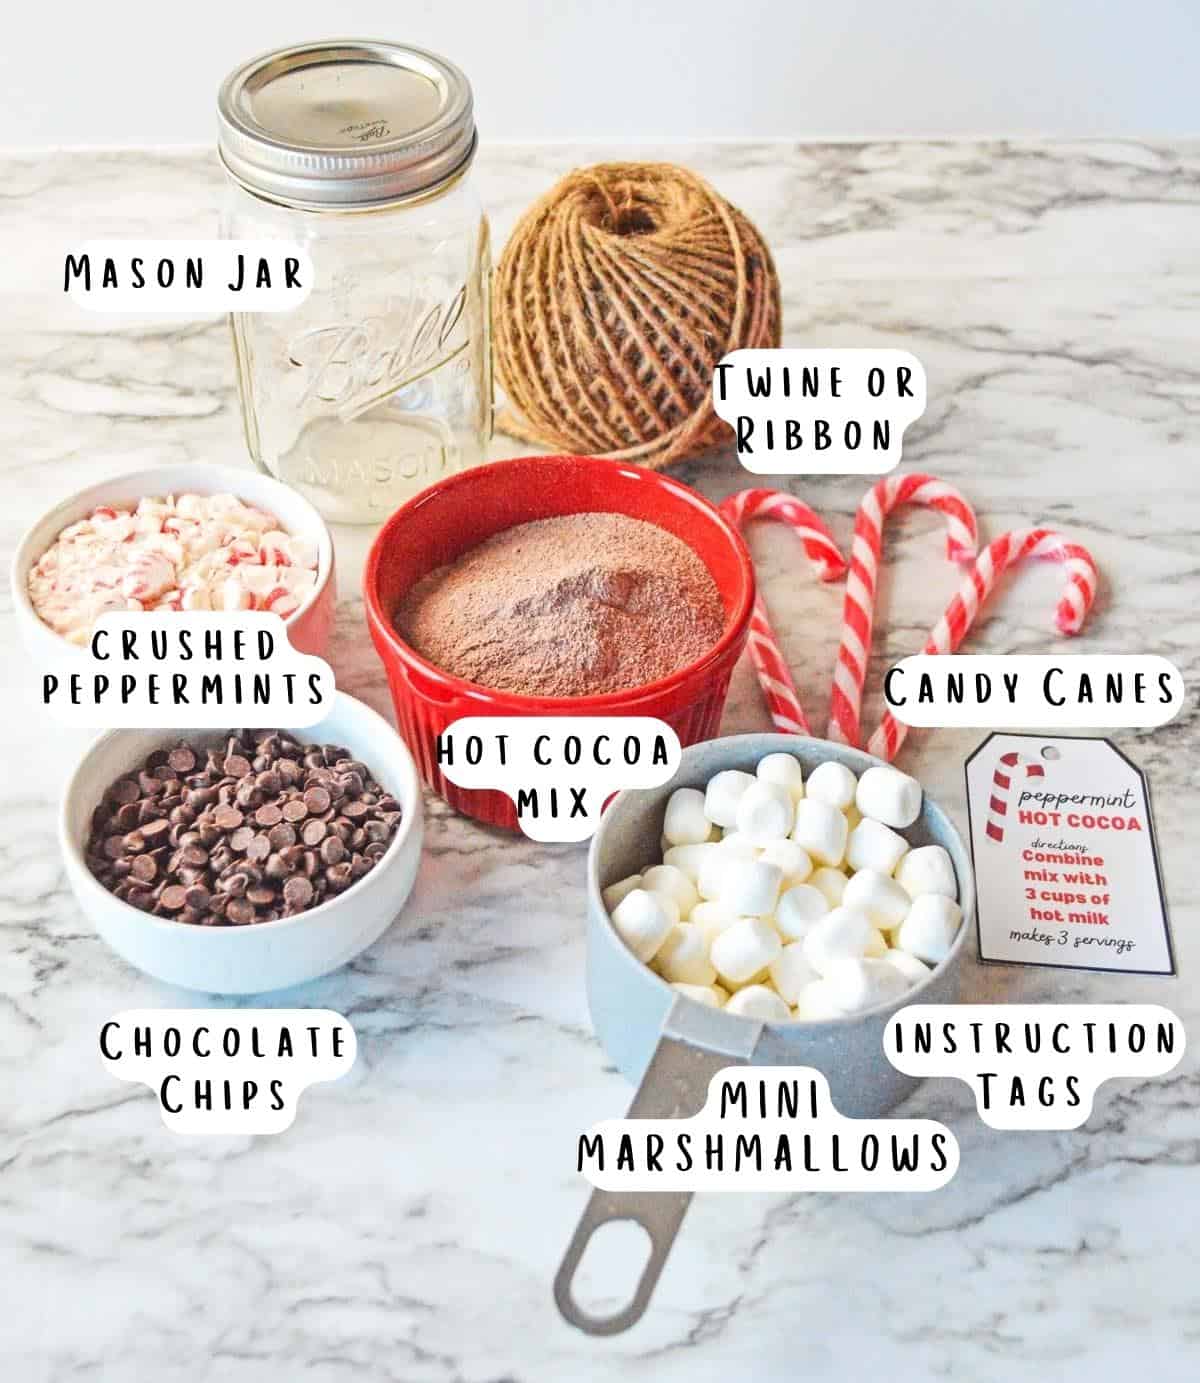 Labeled ingredients needed for peppermint hot cocoa mix in a jar.